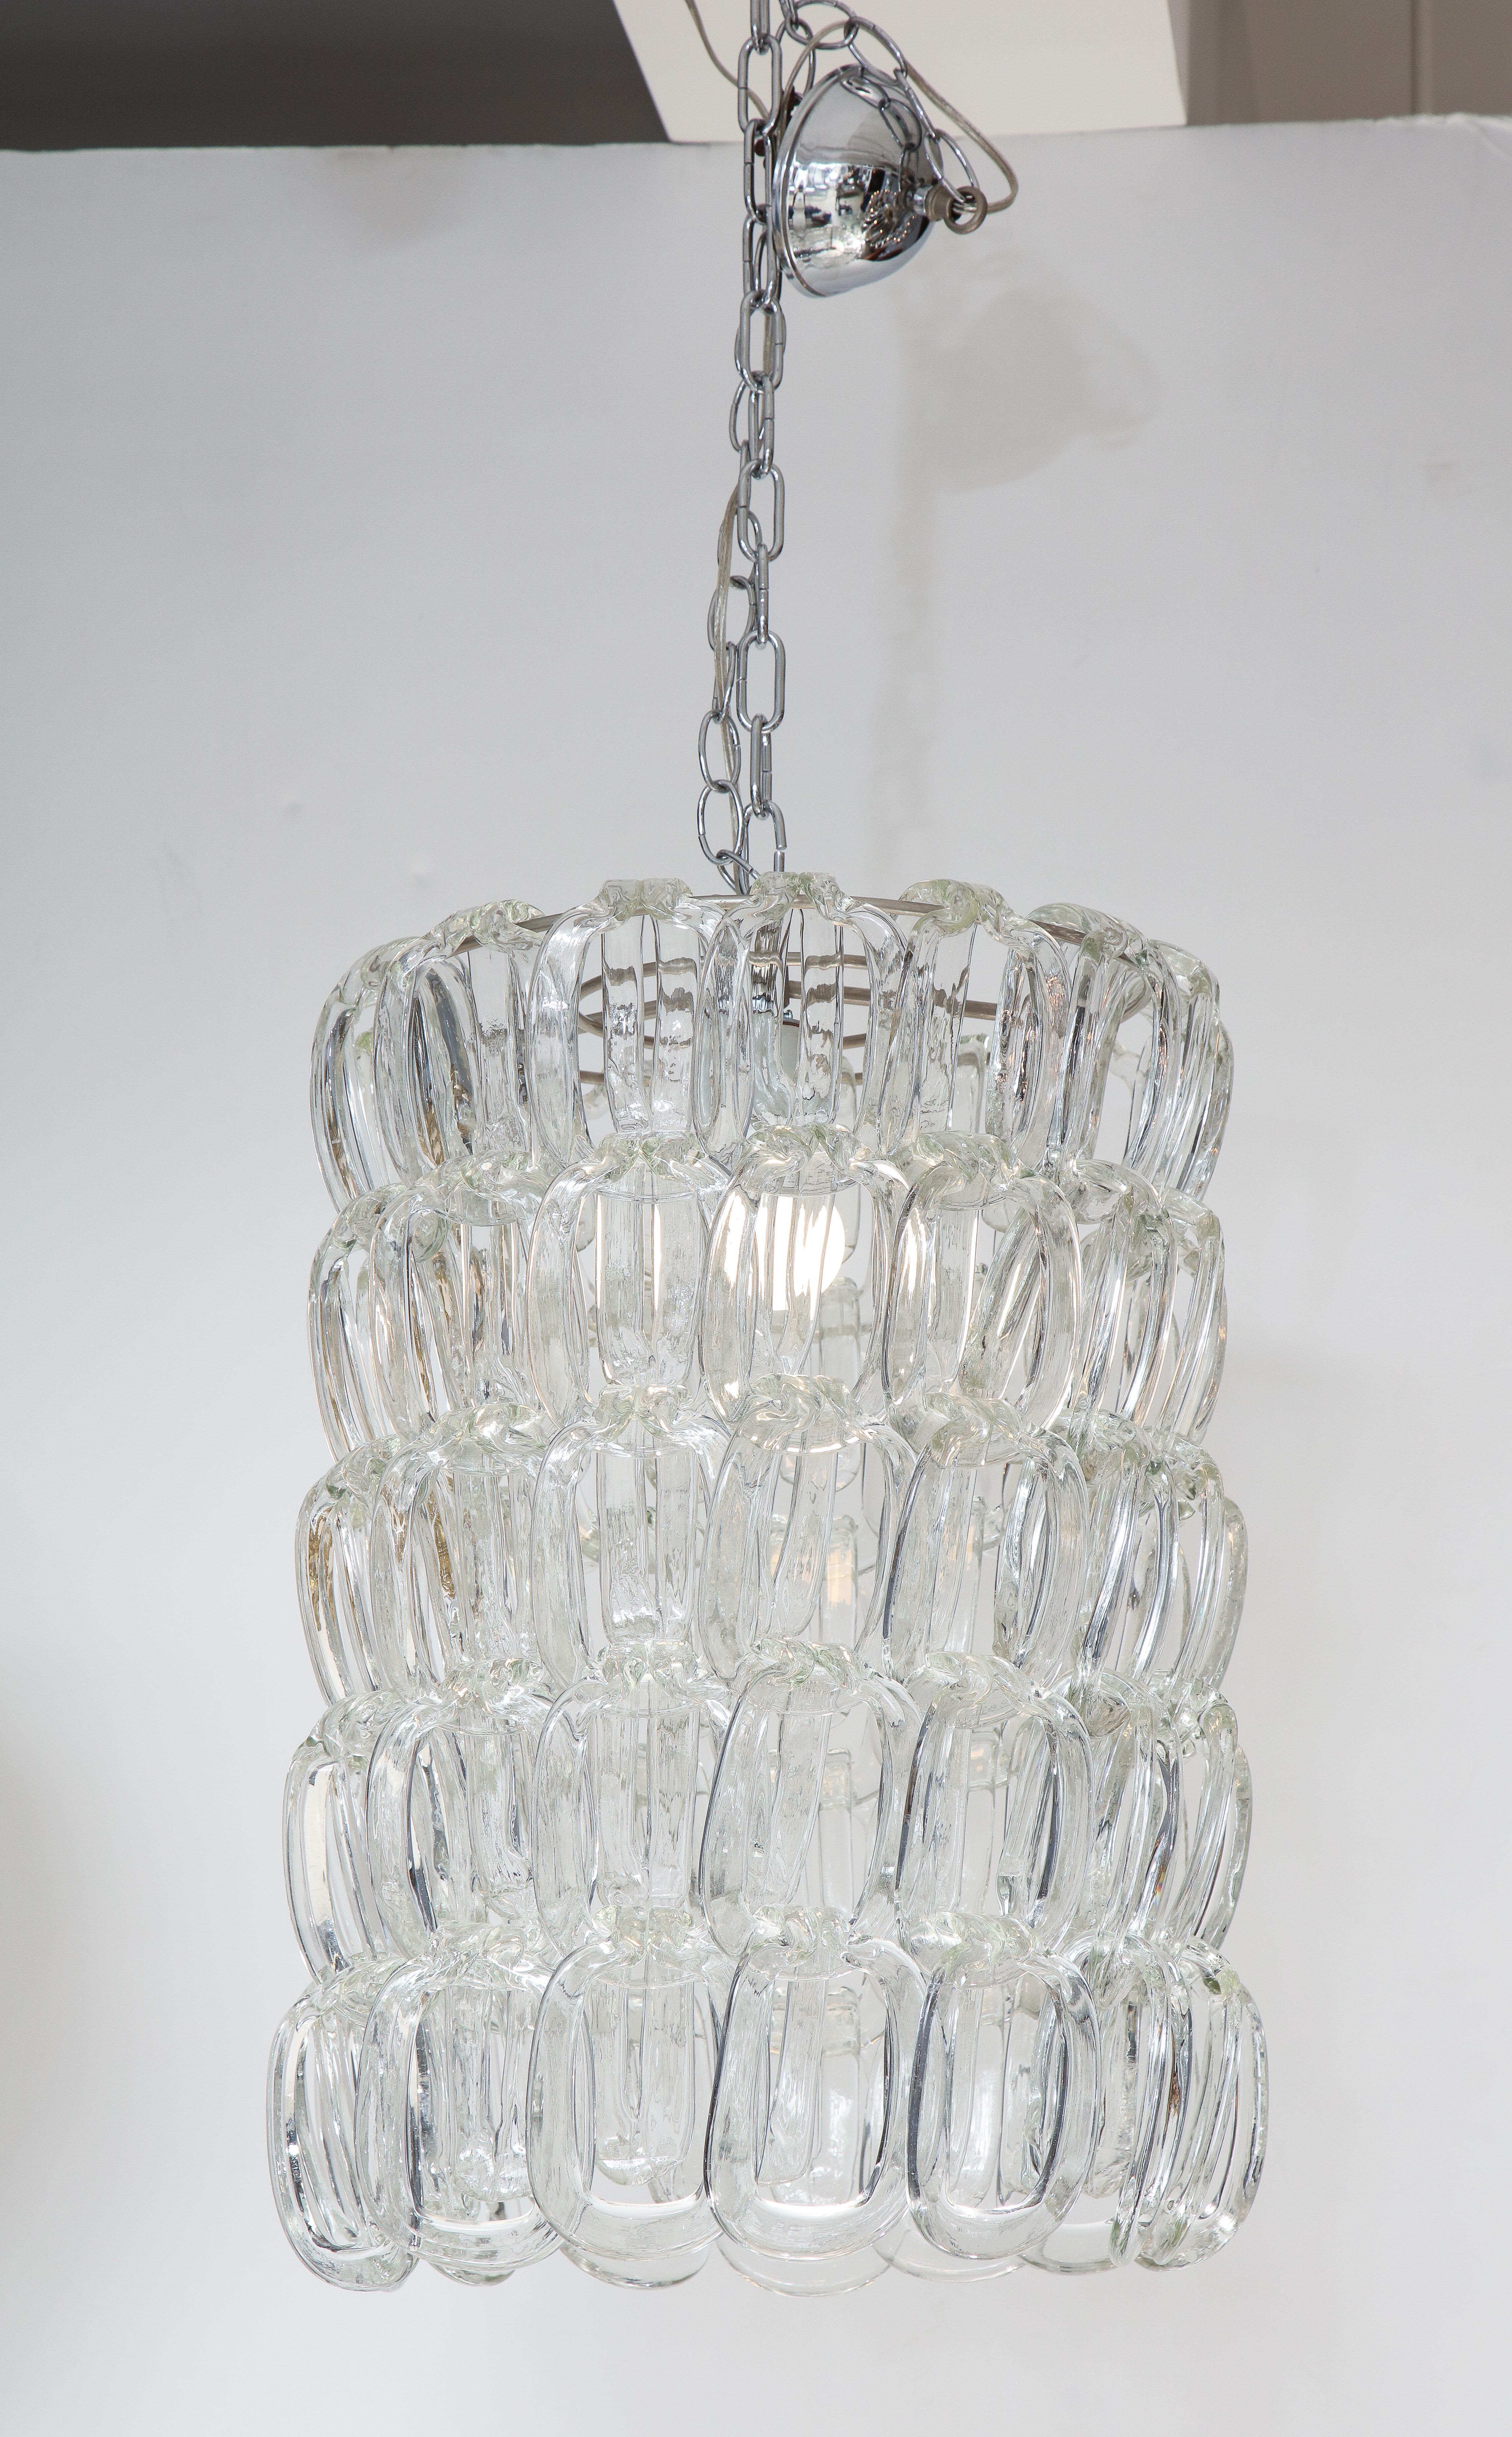 The Giogali chandelier by Angelo Mangiarotti, (1921-2012) for Vistosi, the Murano glass links display as double horseshoe rings, supported by metal interior rings. (Re-wired for USA standards). The glass length, displayed here with 4 levels can be